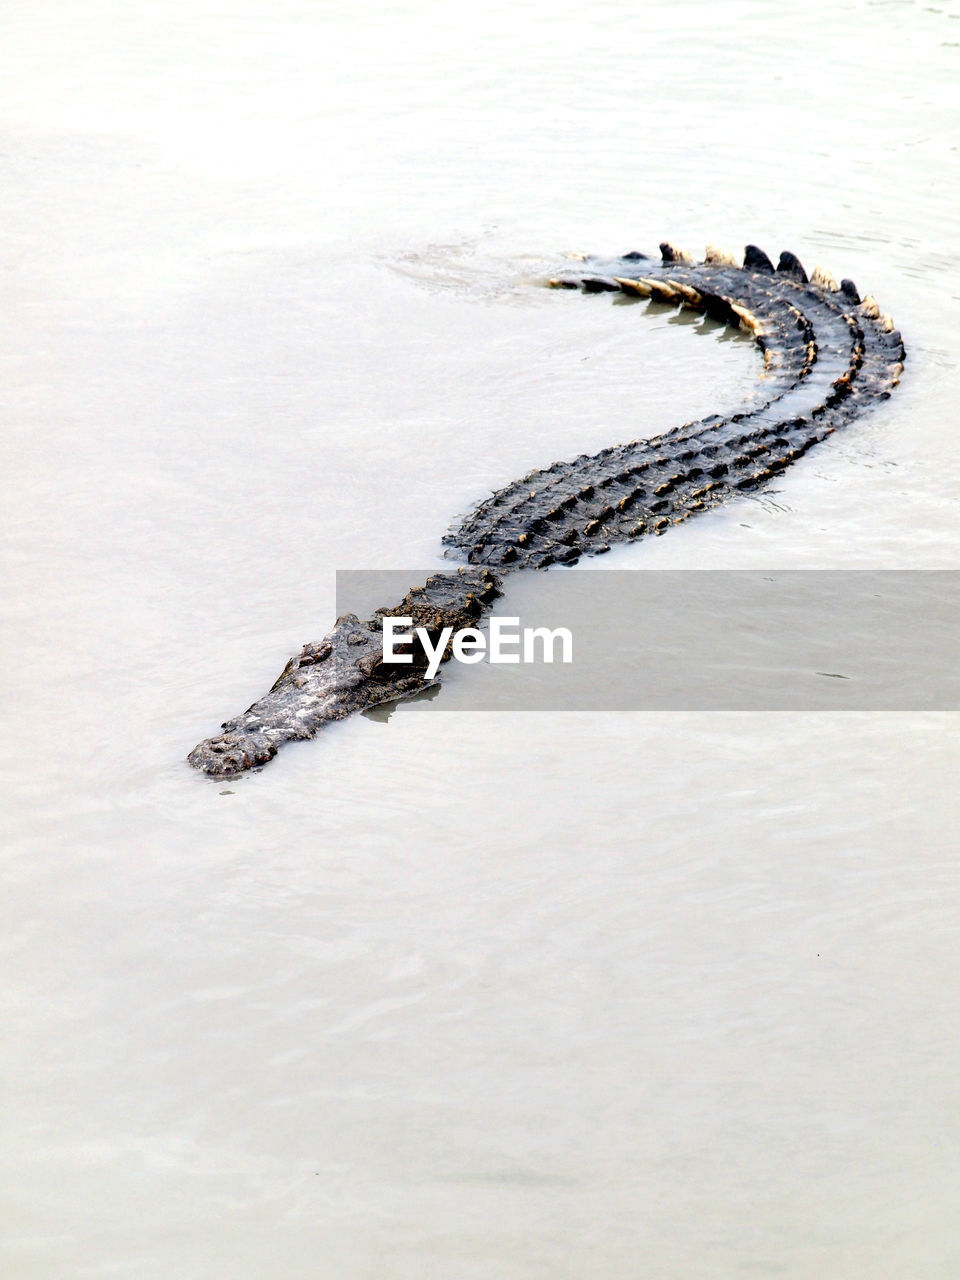 High angle view of alligator swimming in lake